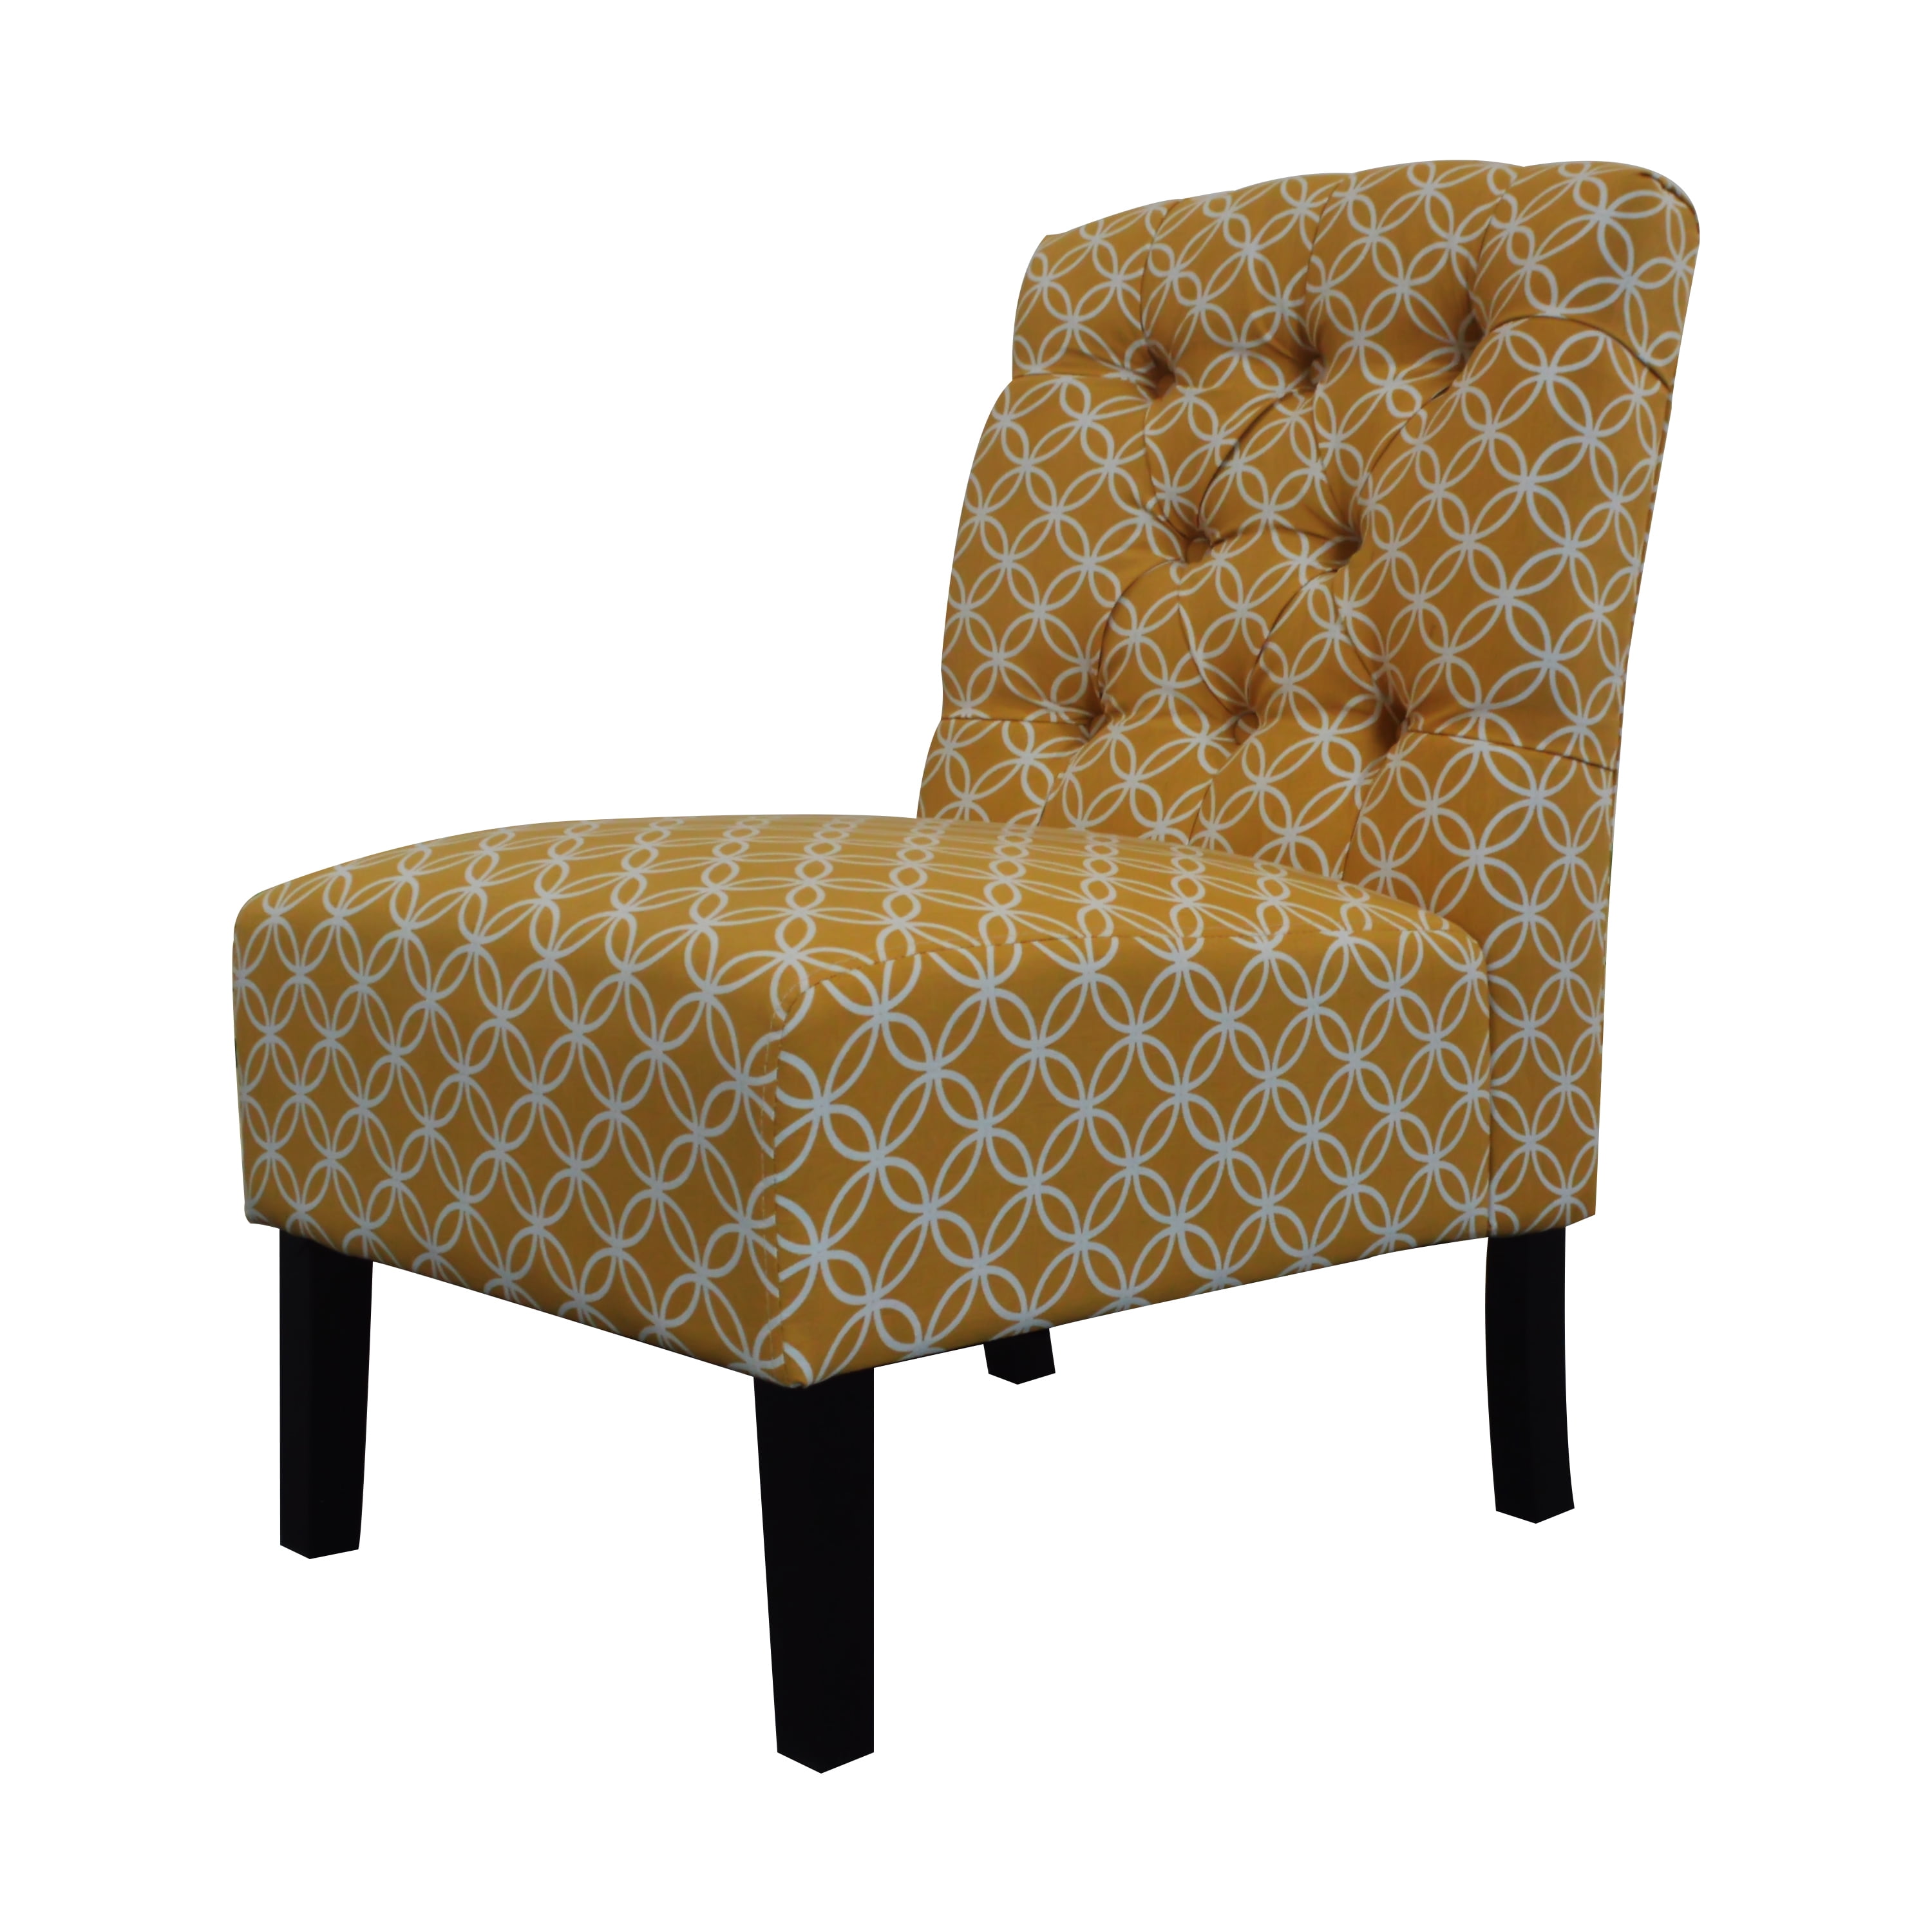 Upholstered Armless Accent Chair In Geometric Yellow/White Patern ...